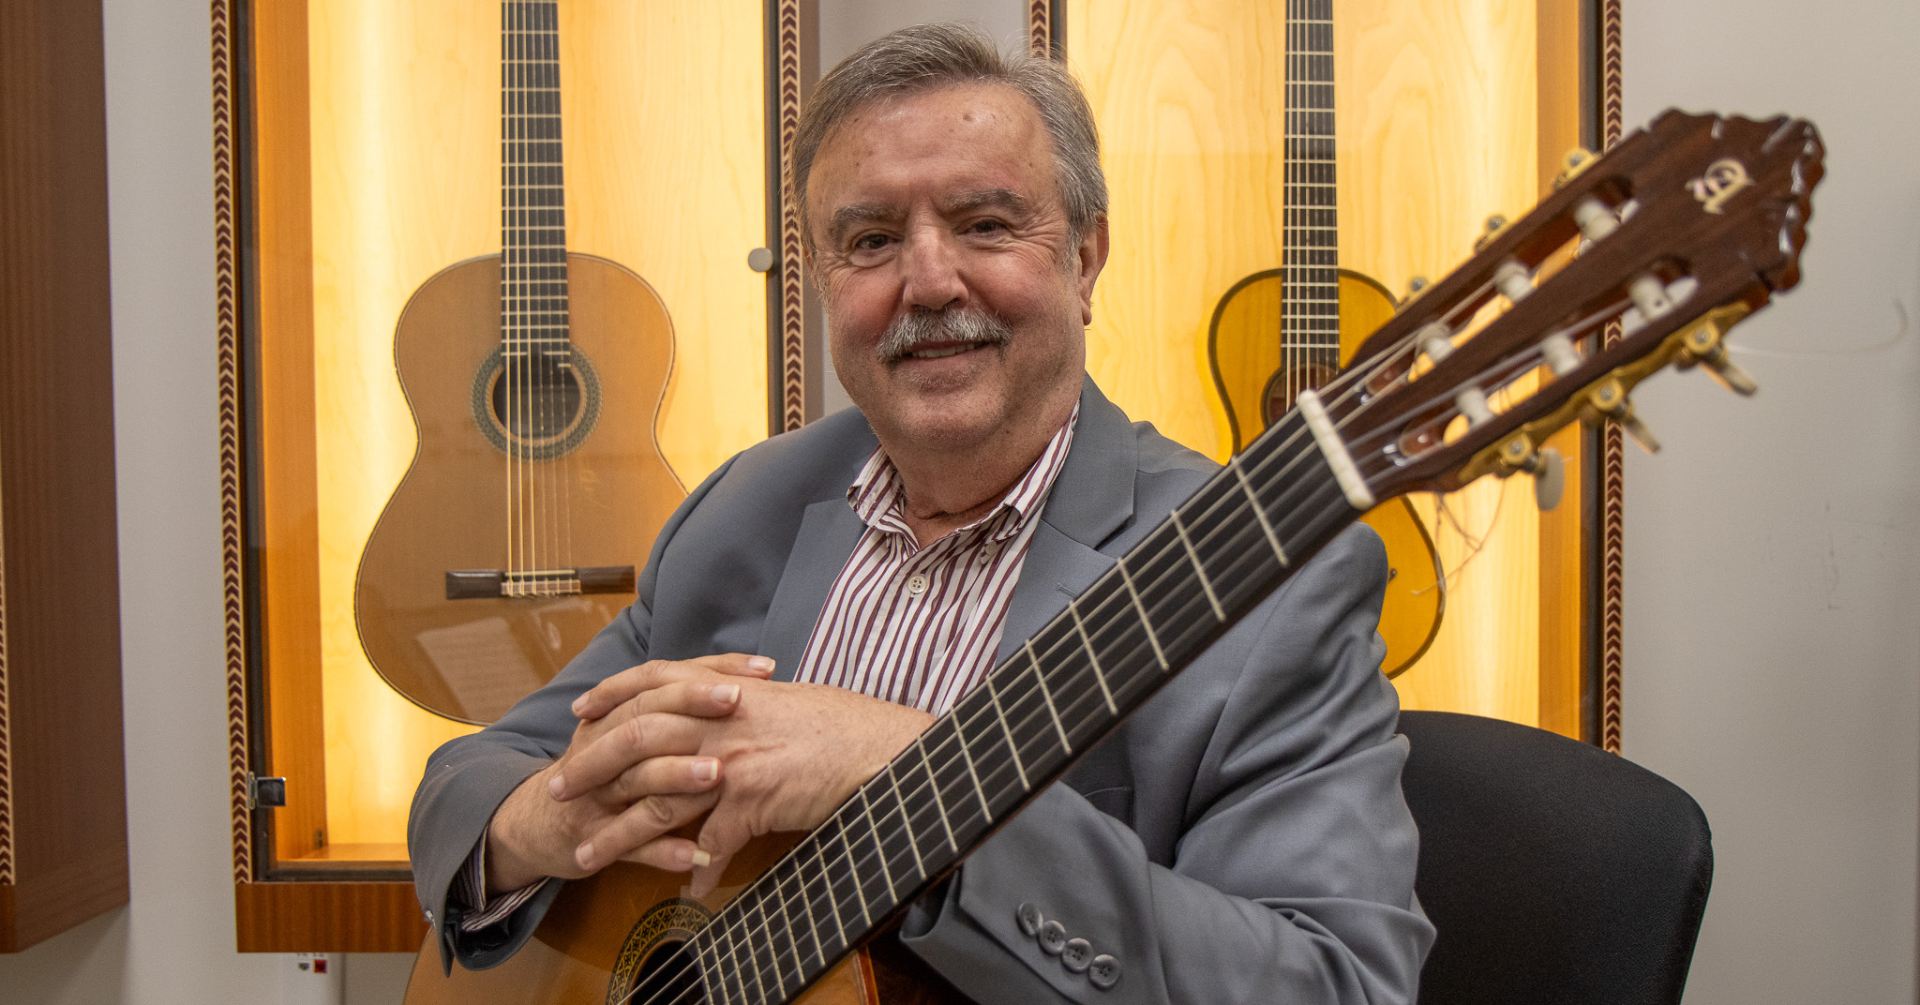 Dr. Enric Madriguera posing for a picture while holding a guitar in the PHY Bldg. in Aug. 2023.